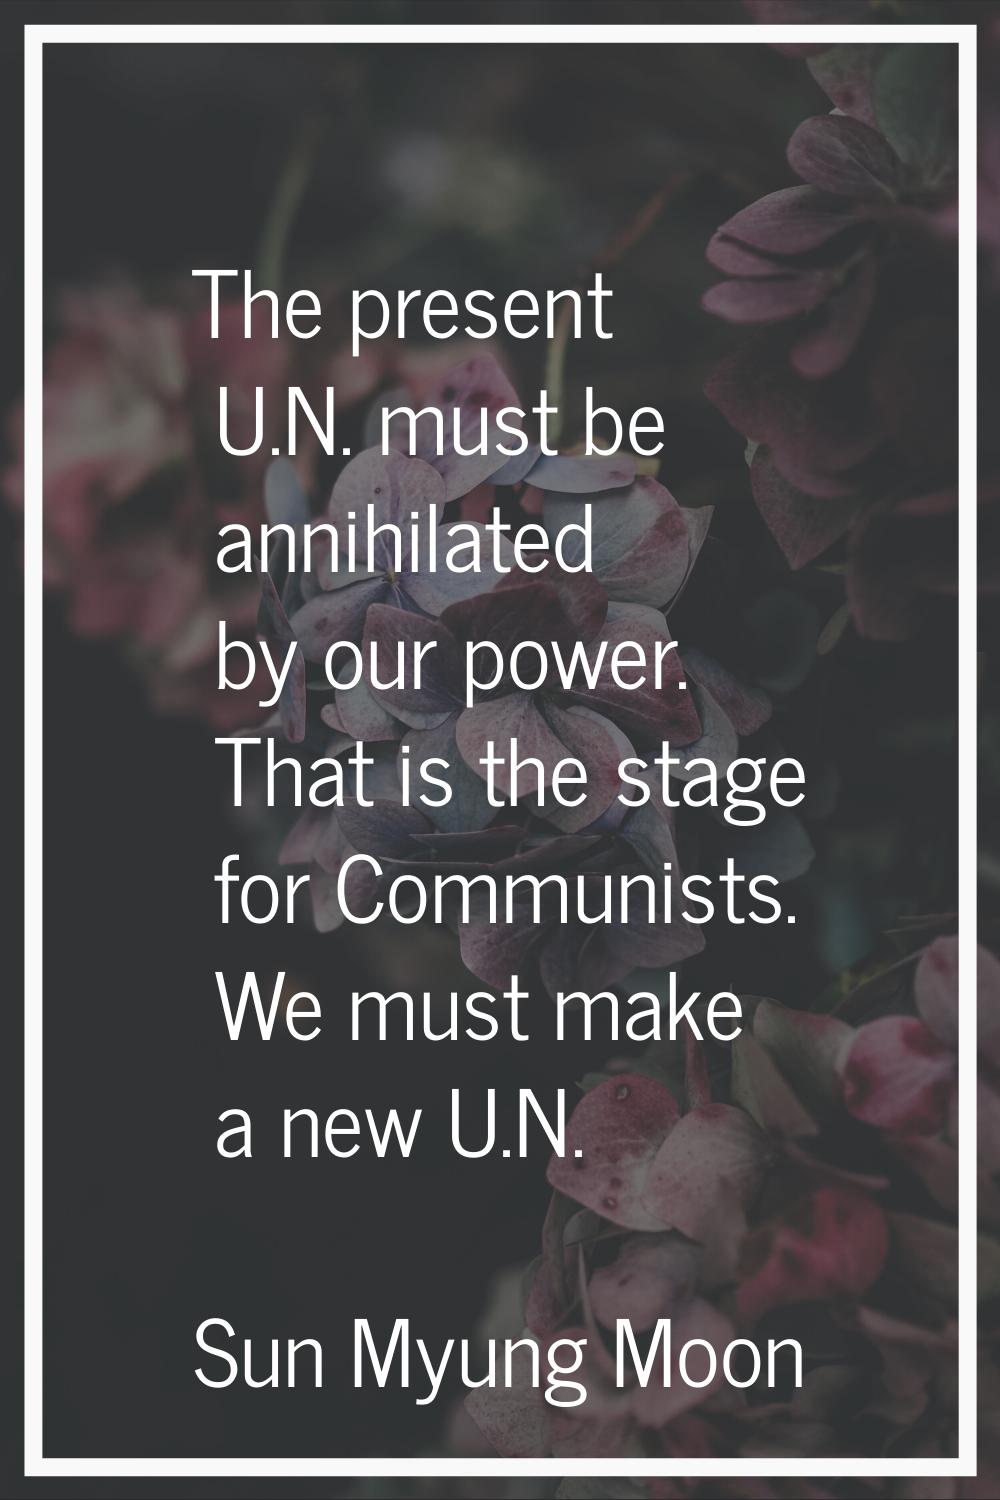 The present U.N. must be annihilated by our power. That is the stage for Communists. We must make a